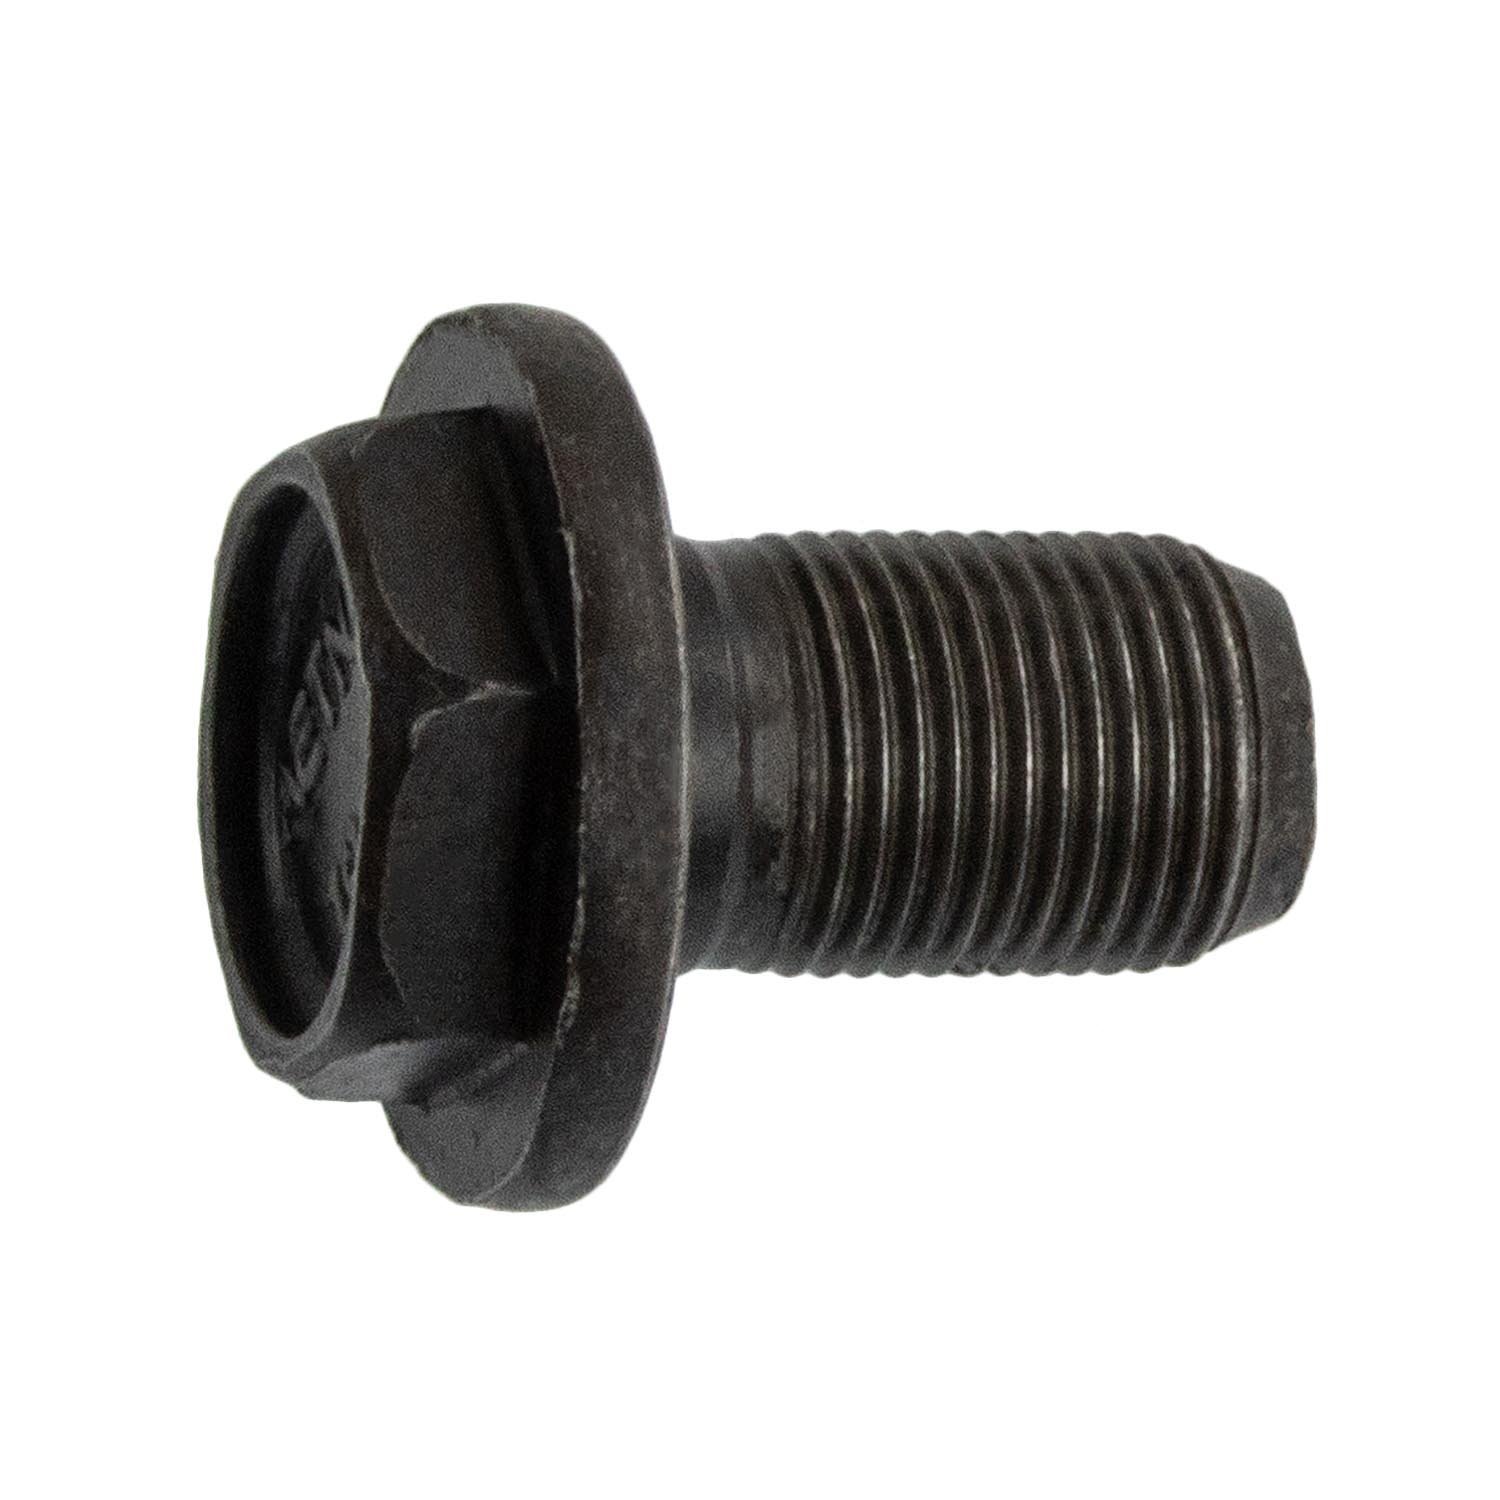 Ring Gear Bolt for 2005-2015 Toyota Tacoma w/8